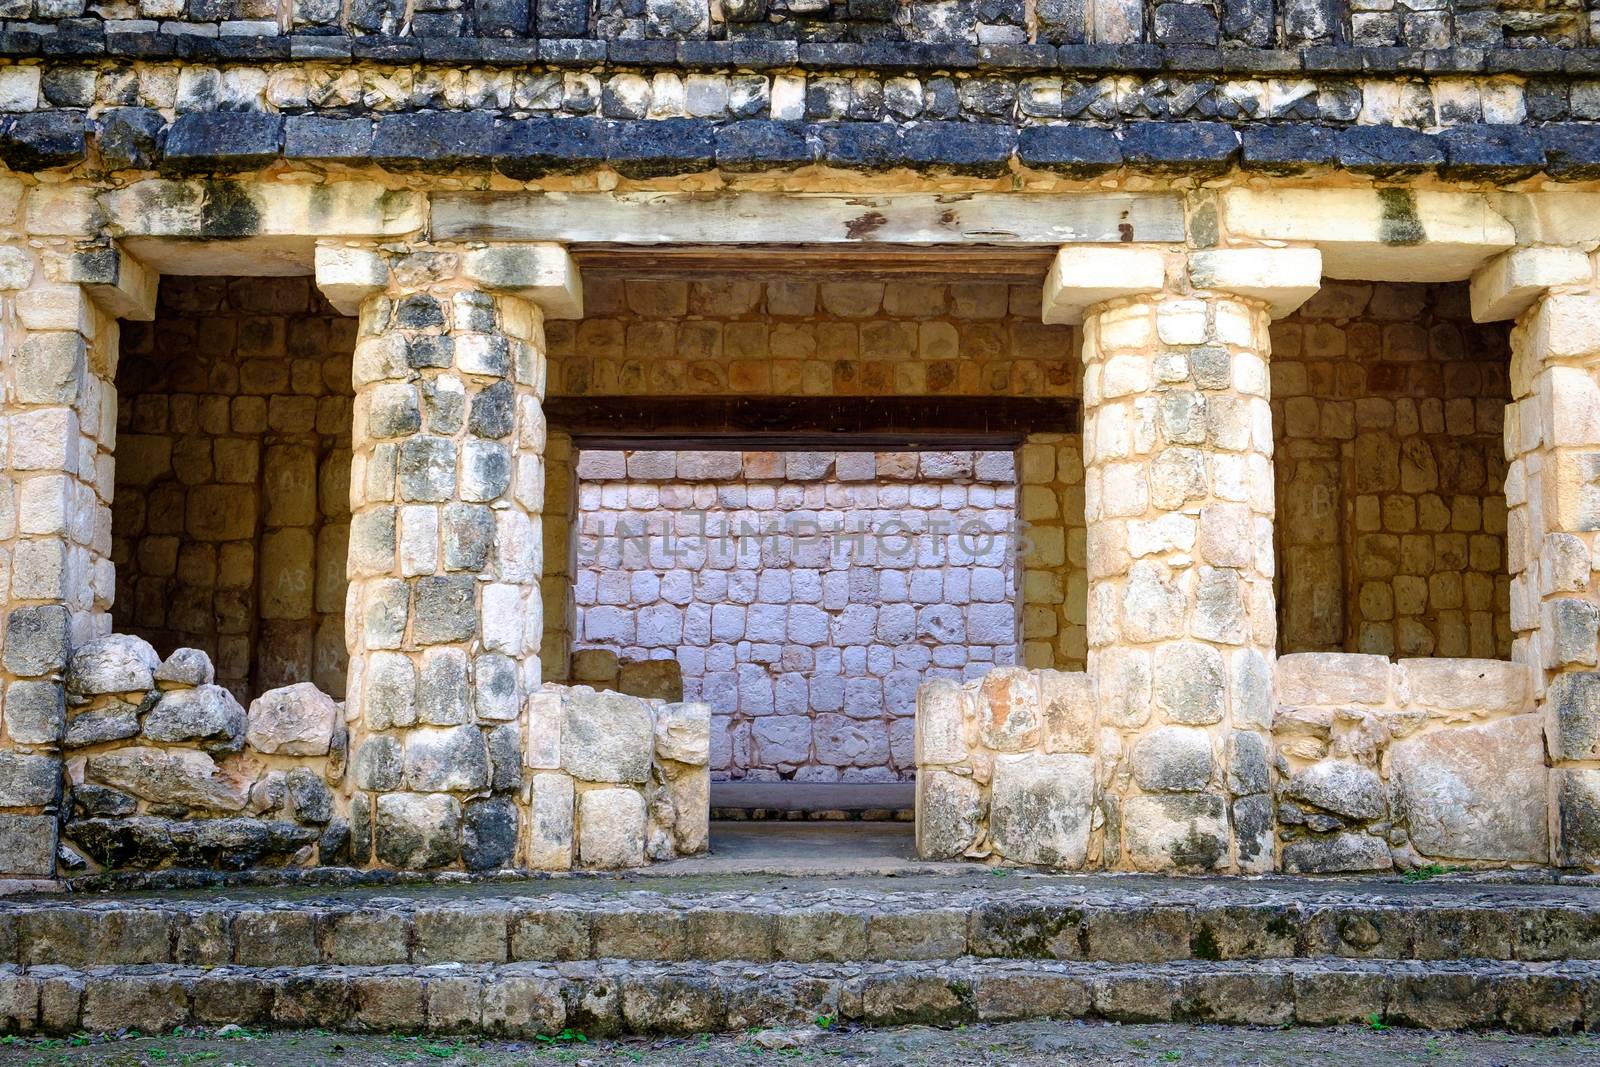 Detail of ancient stone wall ruins with pillars and windows, Uxmal, Mexico